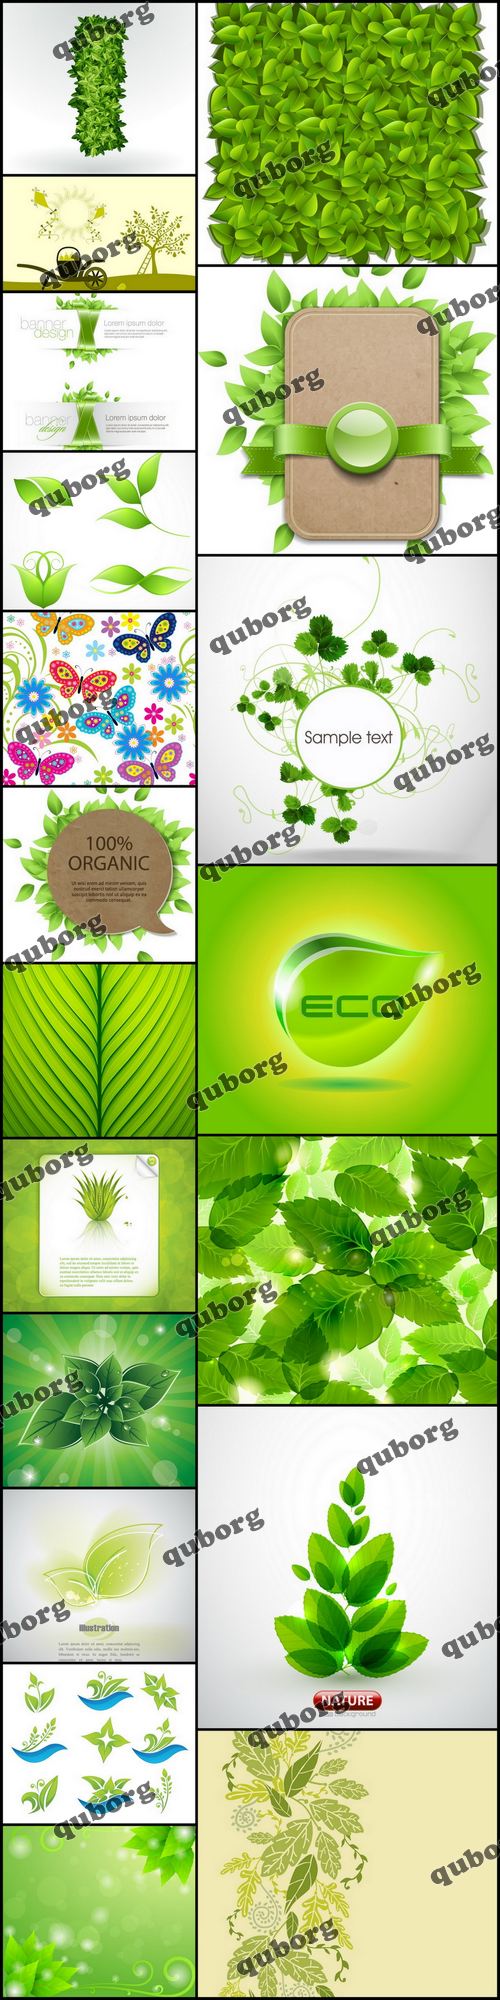 Stock Vector - Green Leaves Background 3